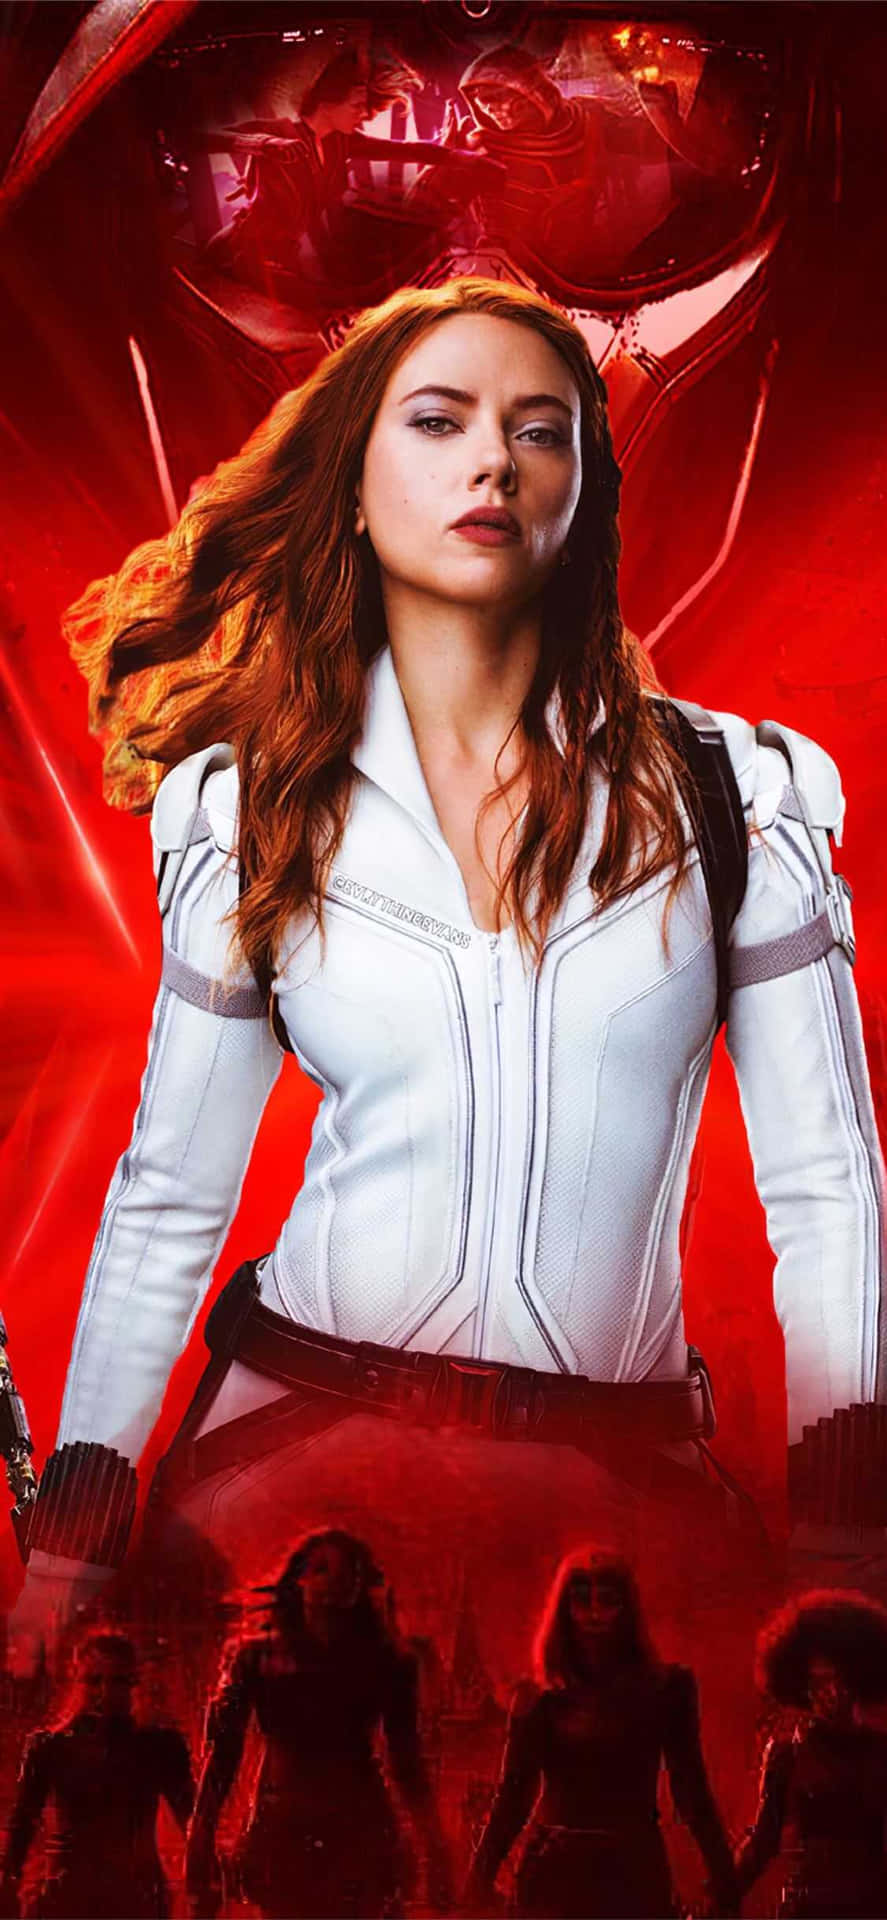 A Poster For The Movie Black Widow Wallpaper